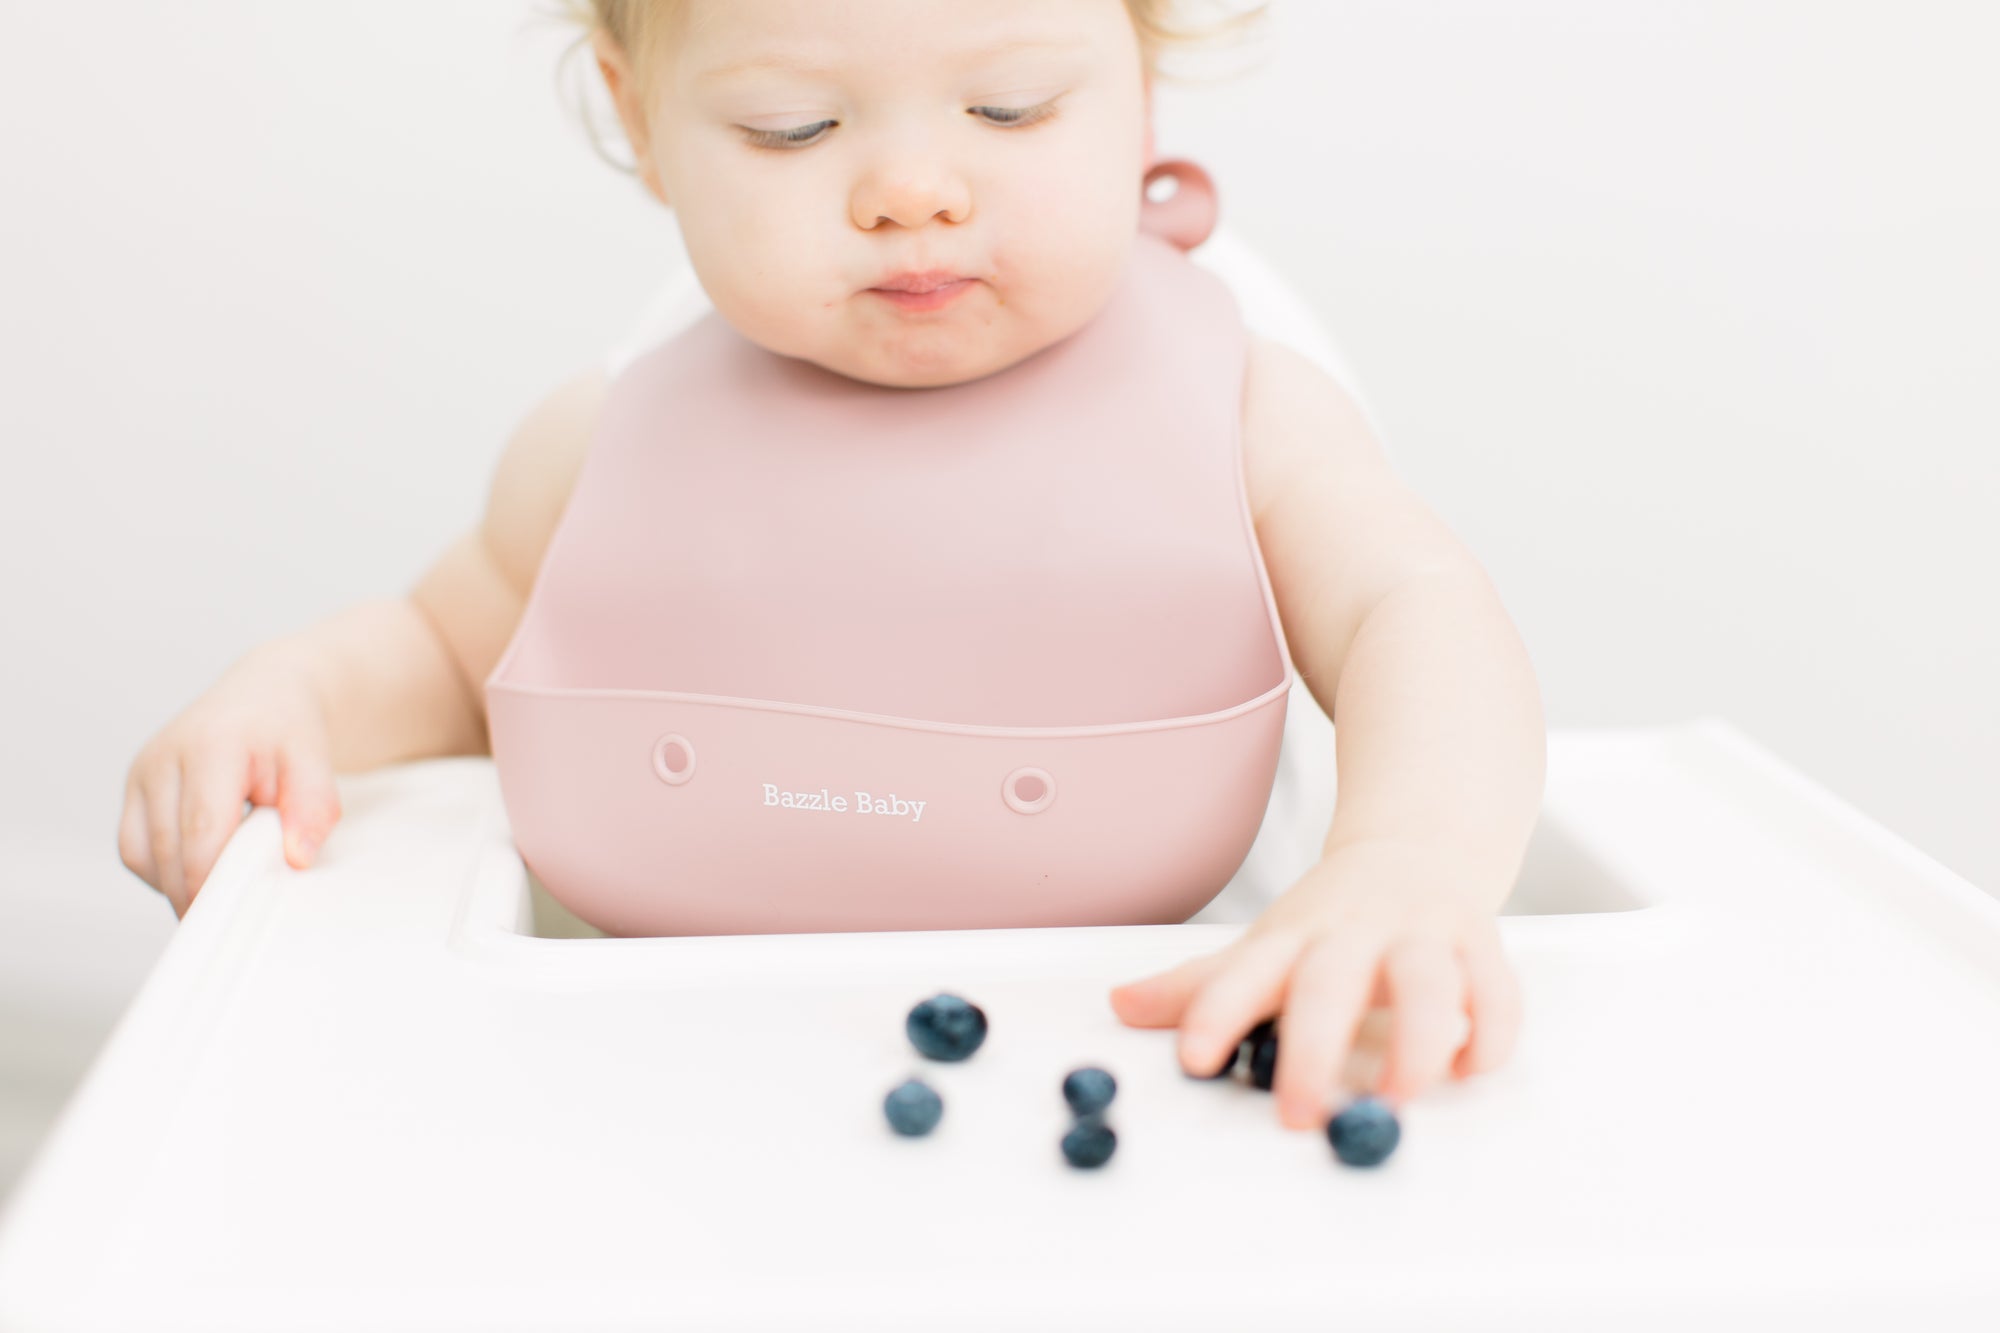 Baby wearing silicone bib with food catcher pocket in pink.